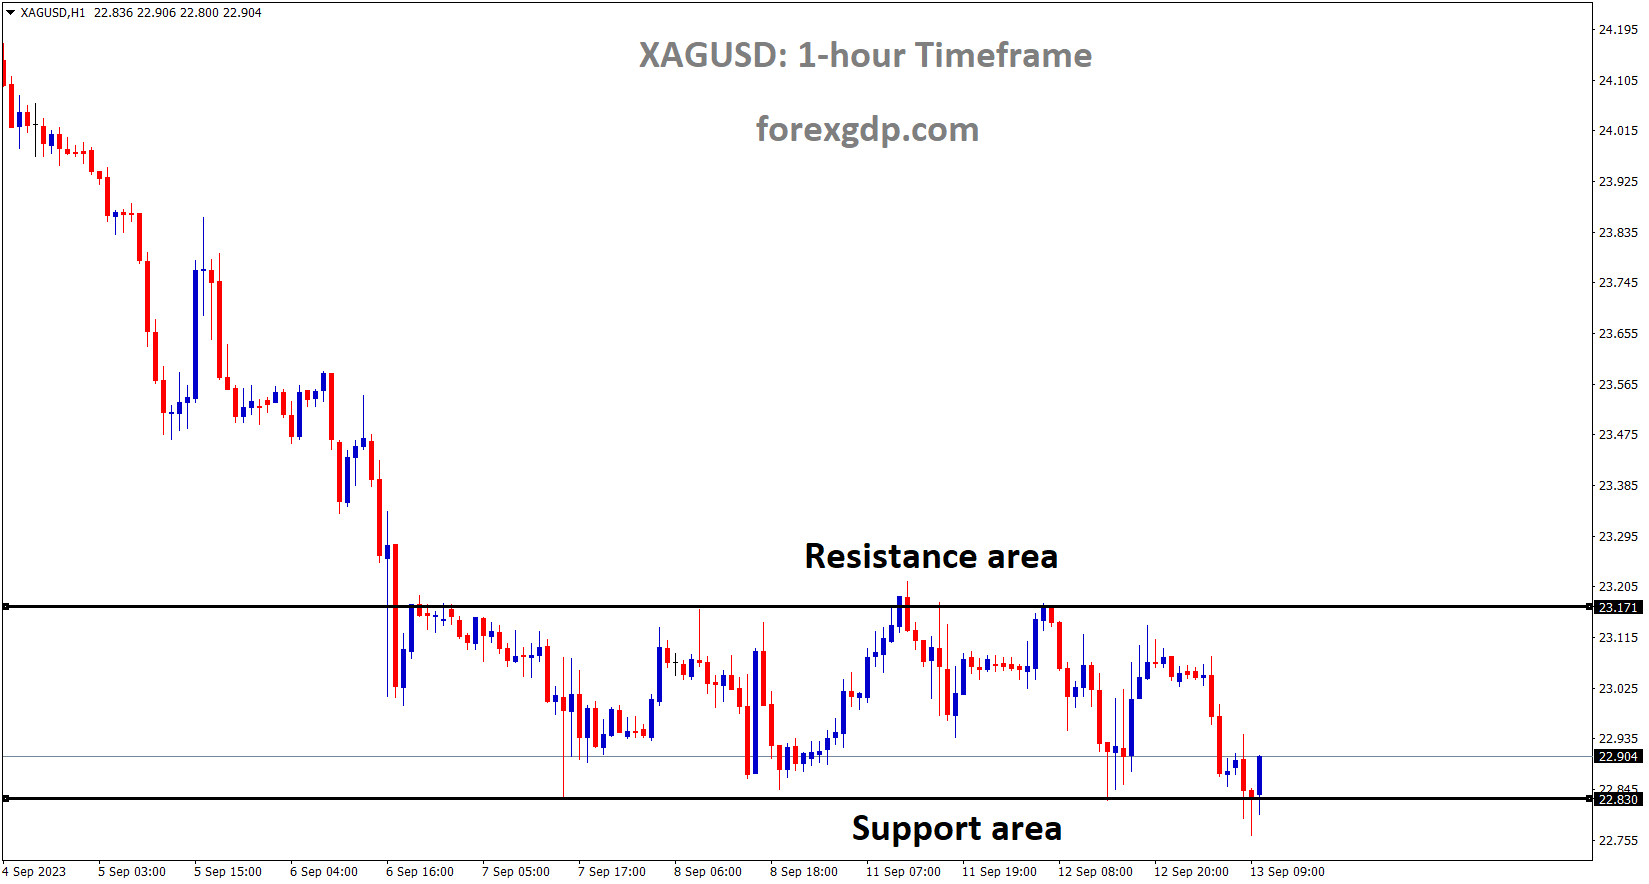 XAGUSD is moving in box pattern and market has reached support area of the pattern